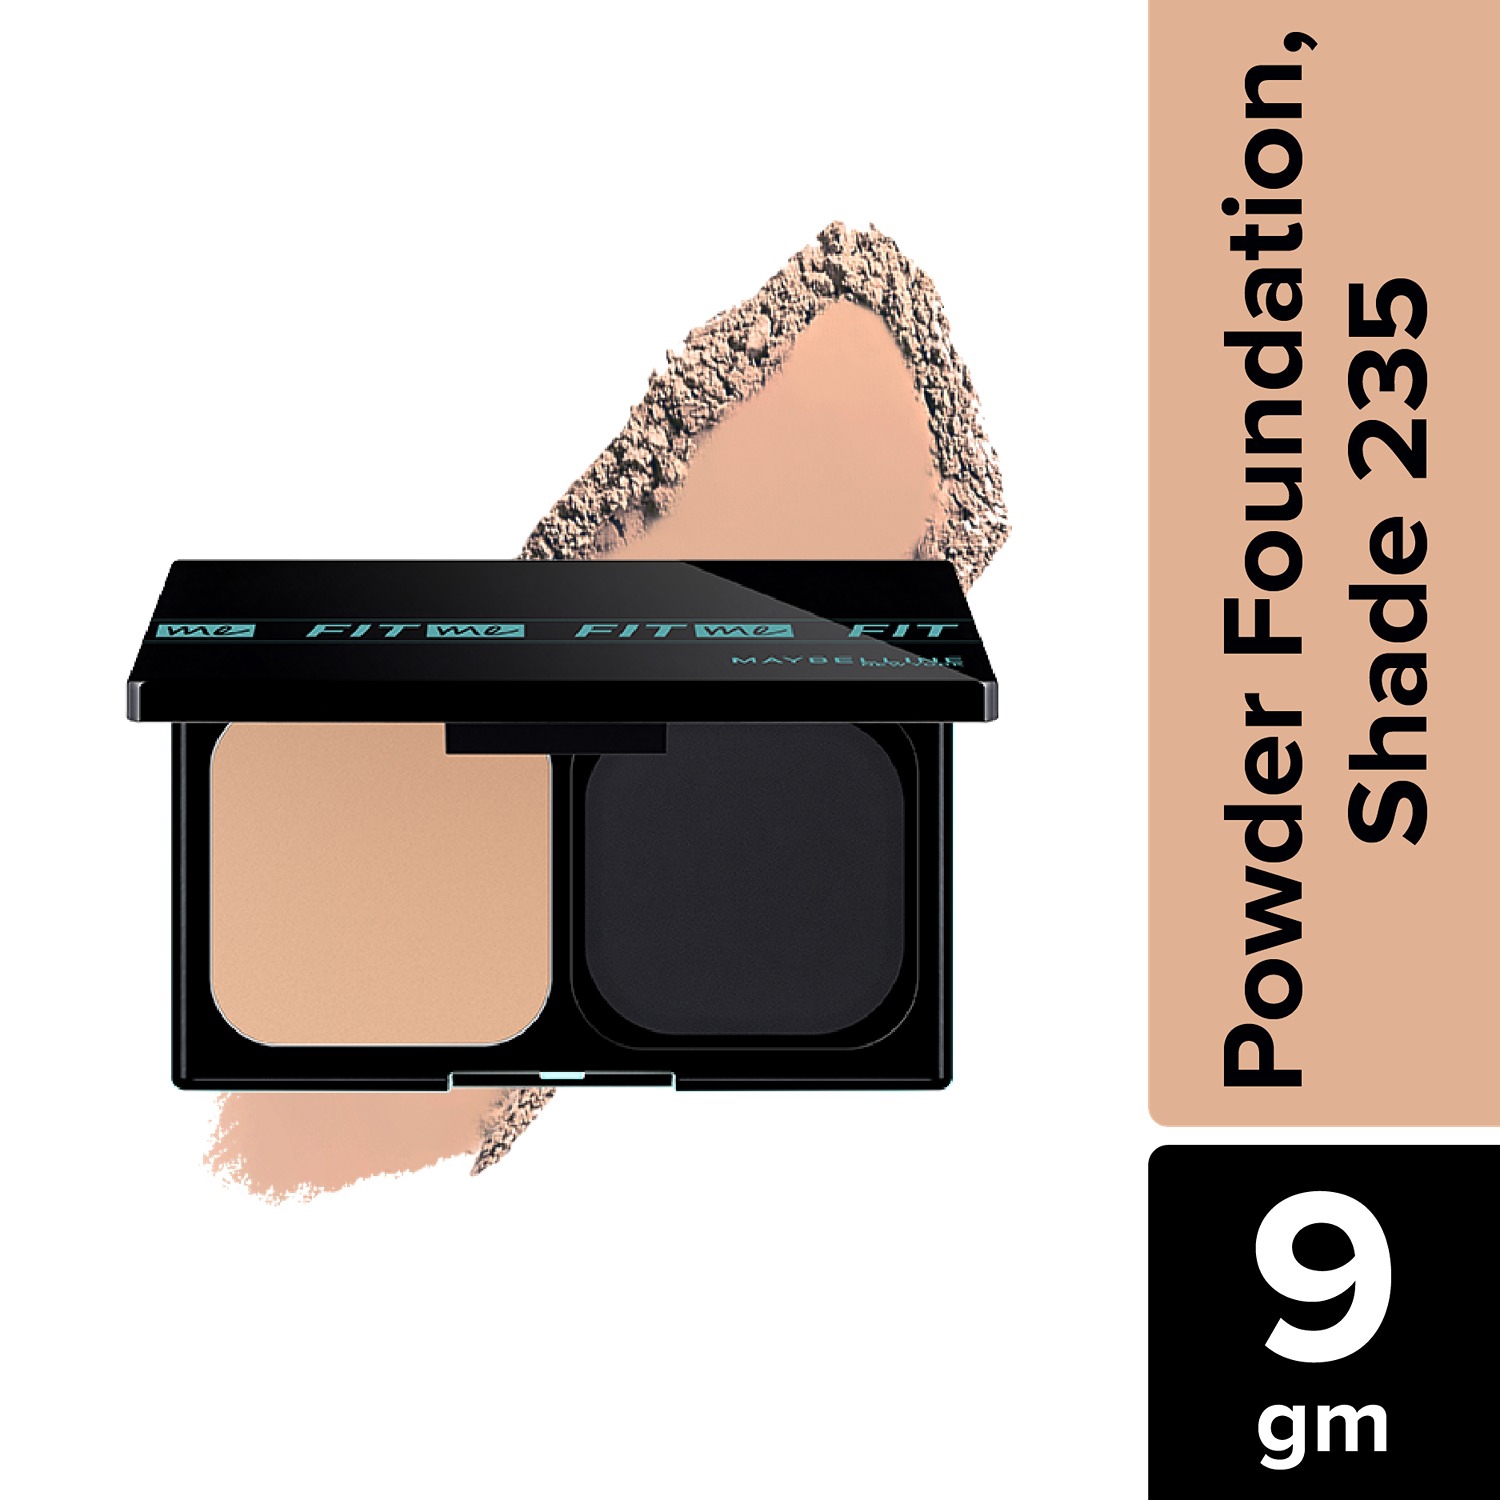 Maybelline New York Fit Me Ultimate Powder Foundation - Shade 110 (9g)